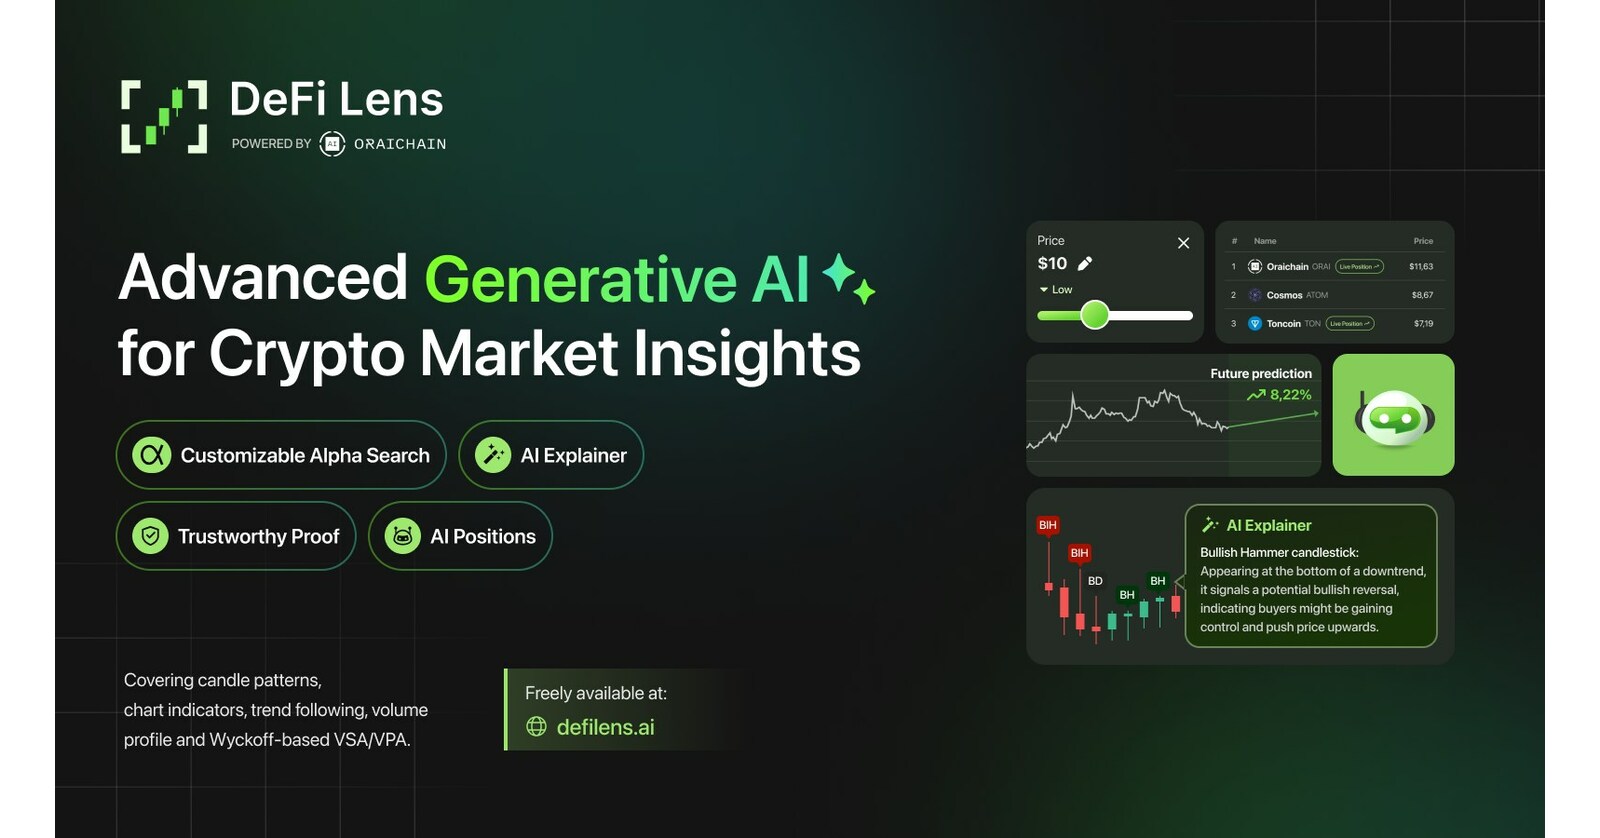 DeFi Lens builds advanced Generative AI for Technical Analysis